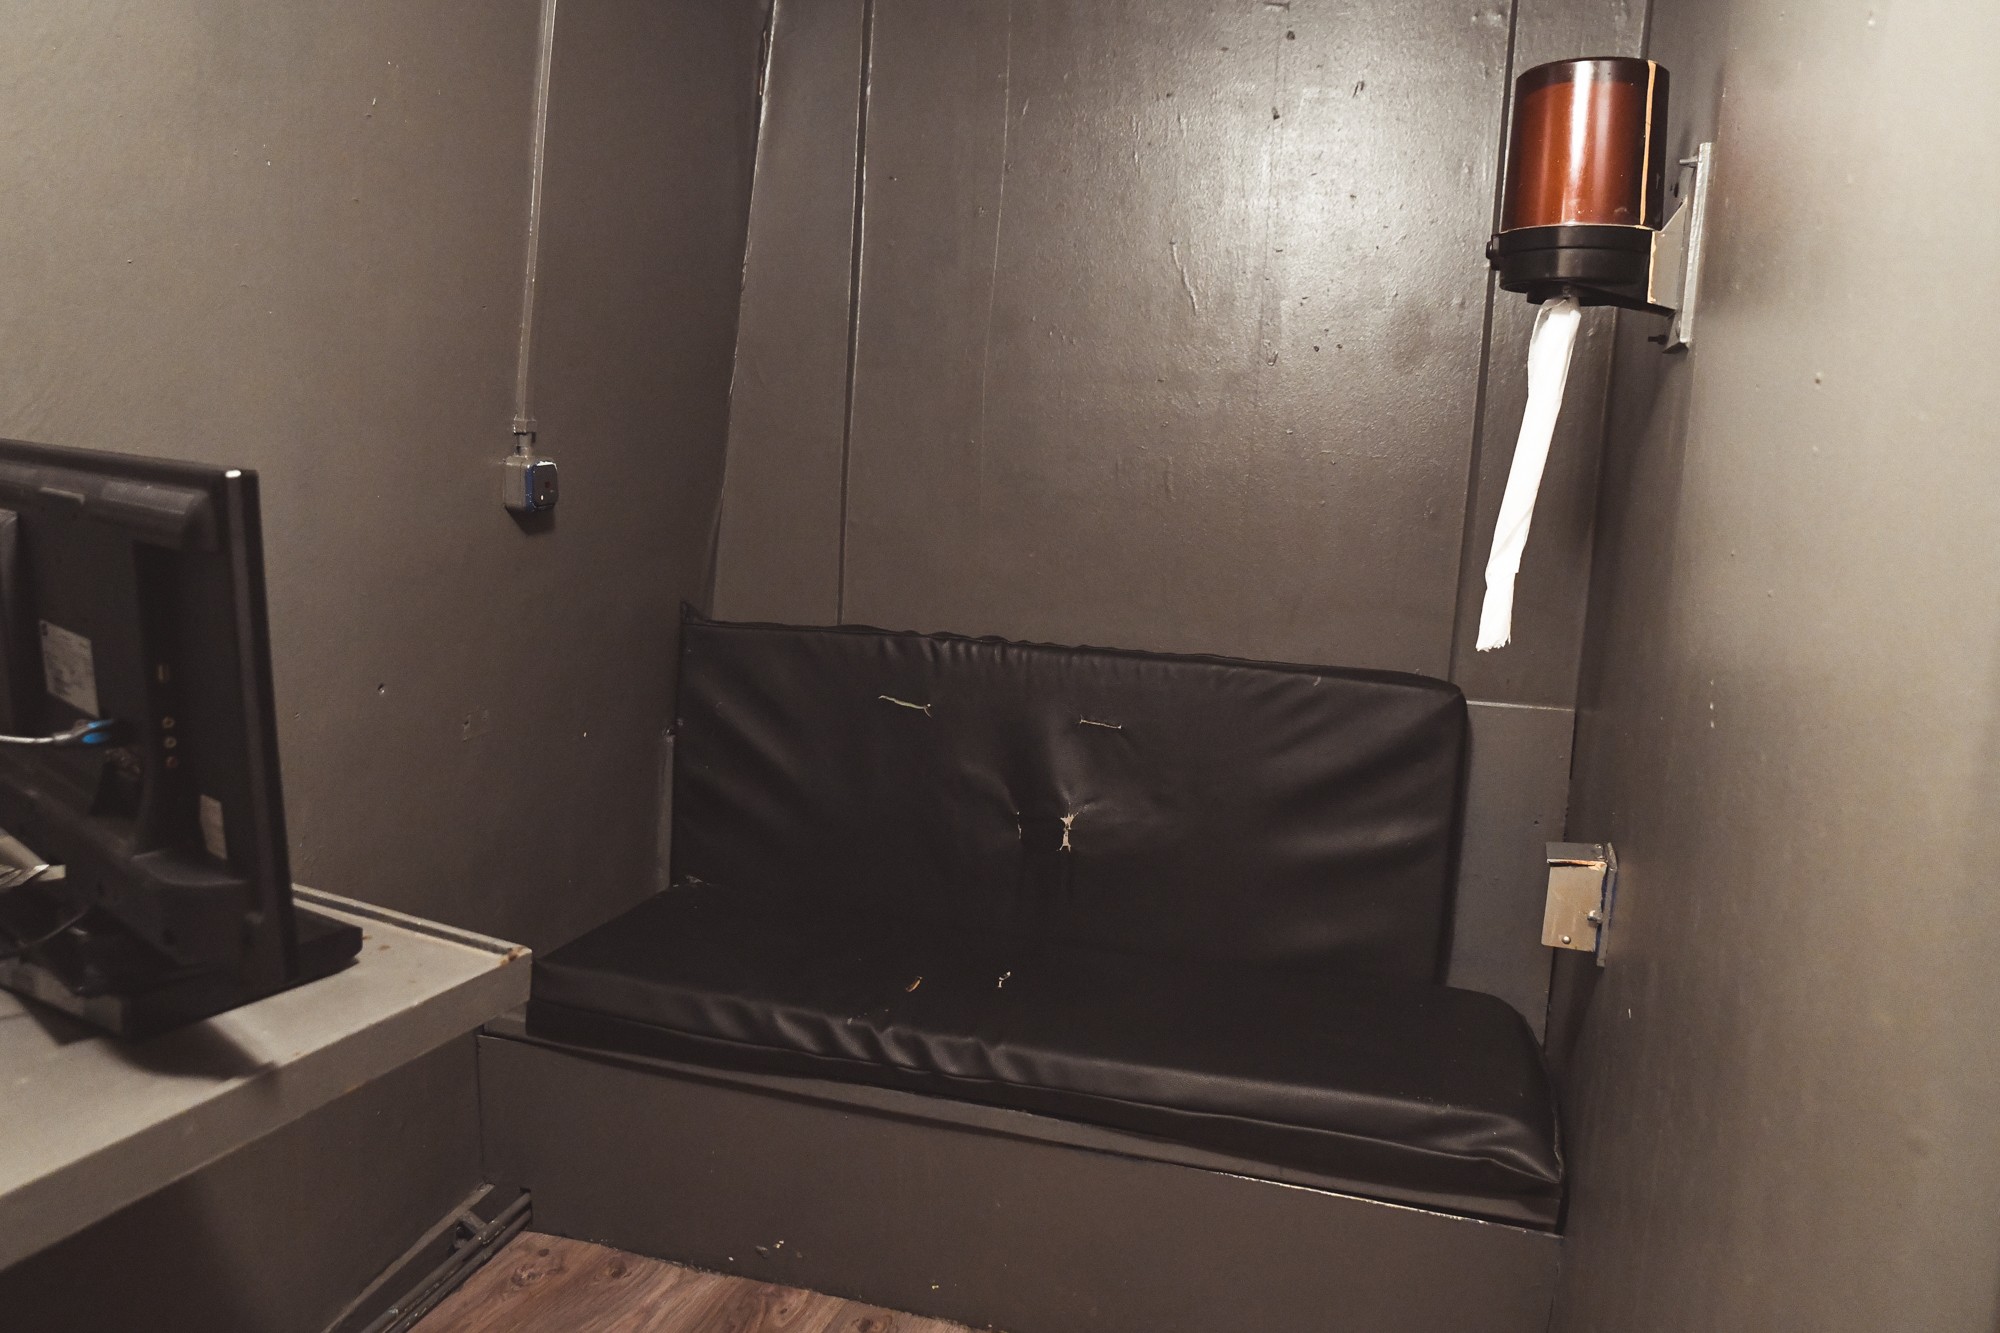 Booth Room Sex - A Tour of the Last Wanking Booths in the Netherlands